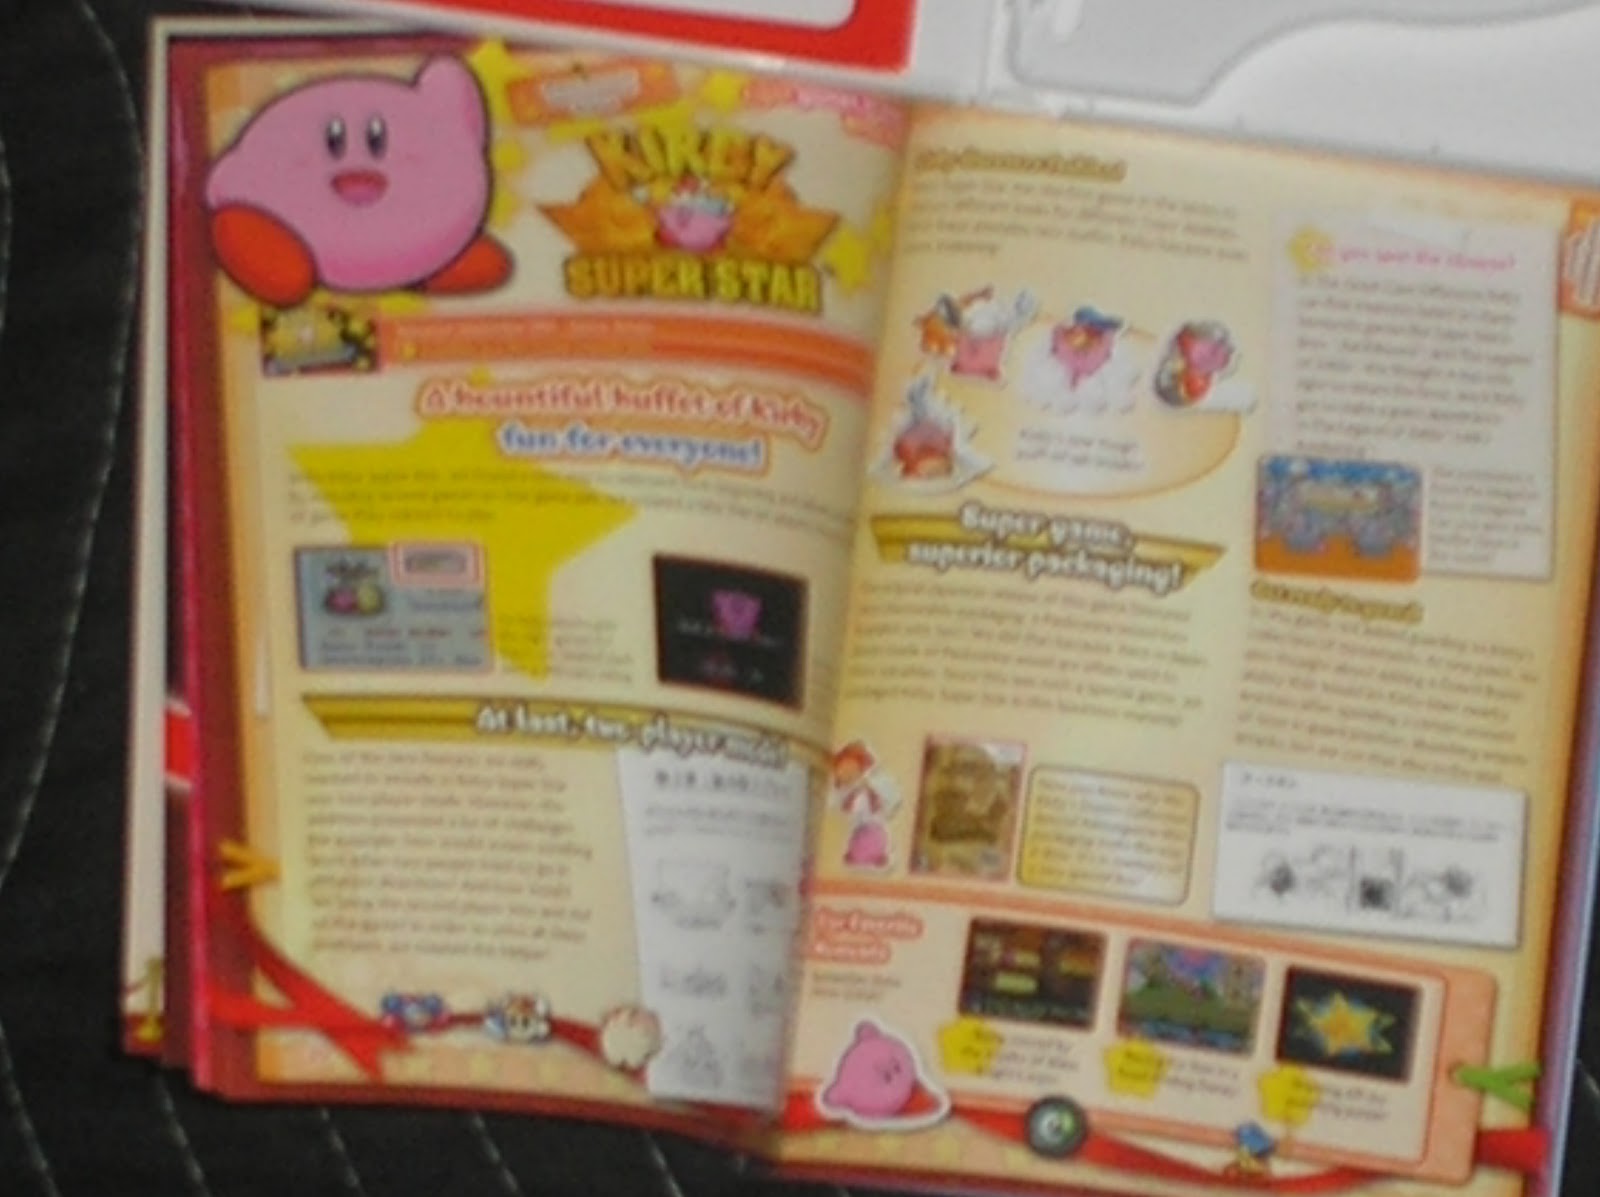 GAMING ROCKS ON: Kirby's Dream Collection Special Edition Unboxing